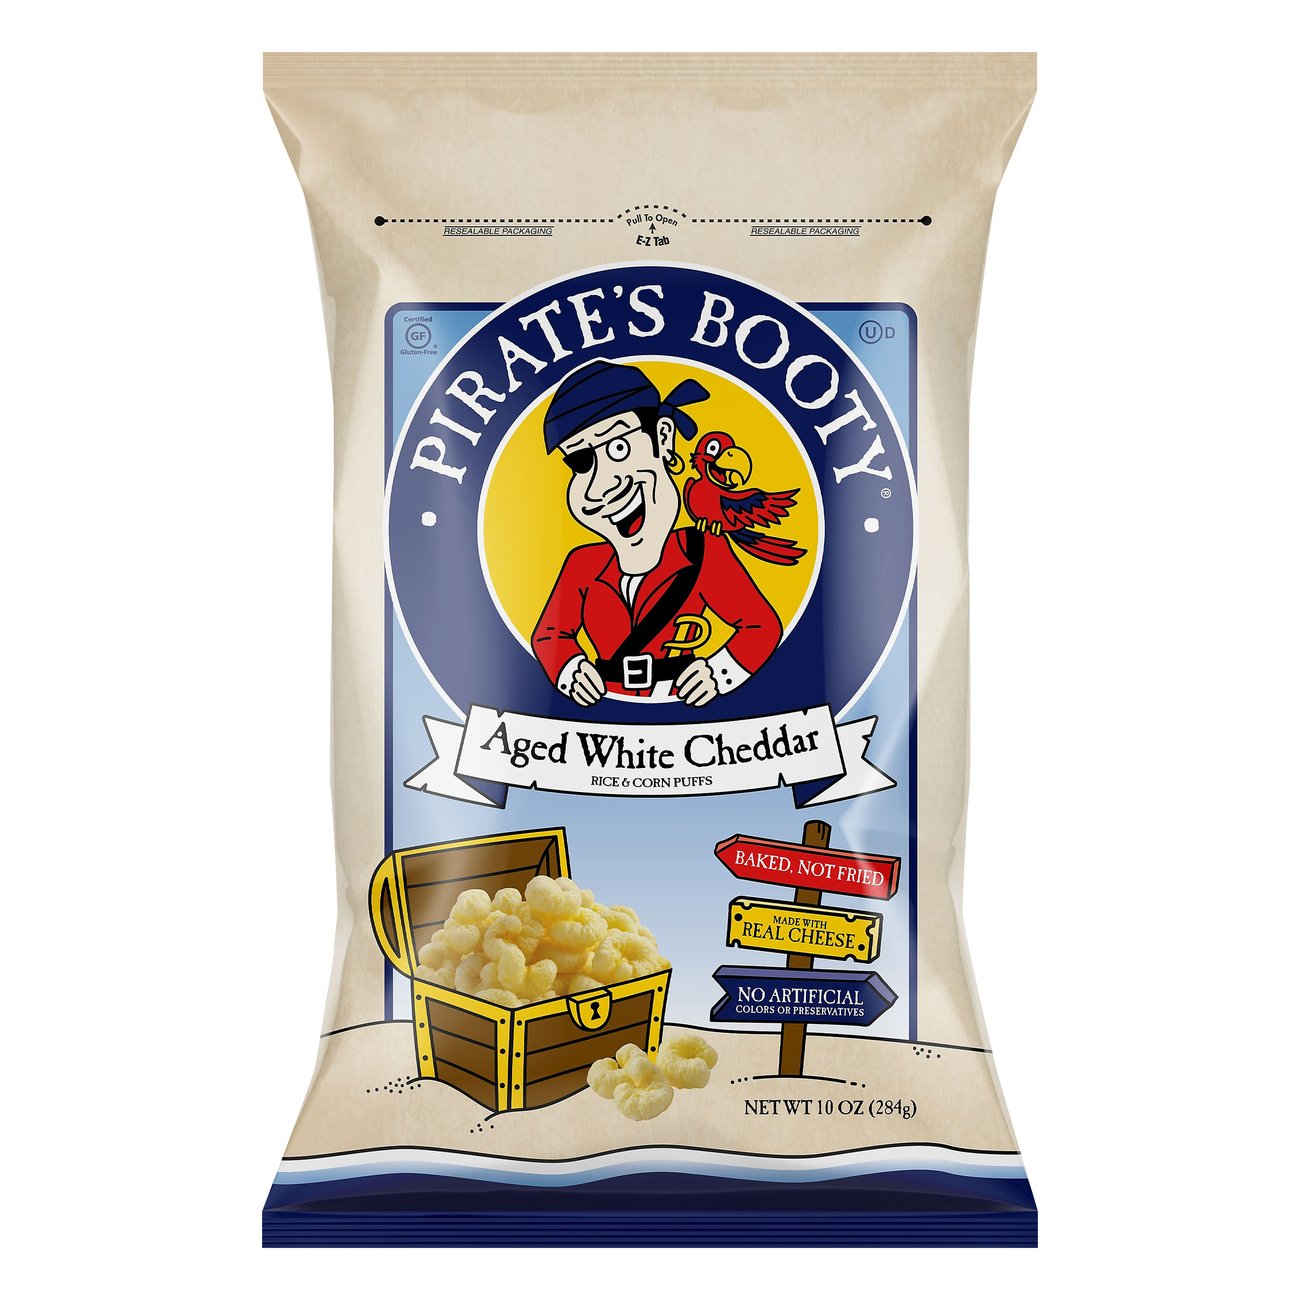 Pirate's Booty Aged White Cheddar Rice and Corn Puffs - Shop Chips at H-E-B